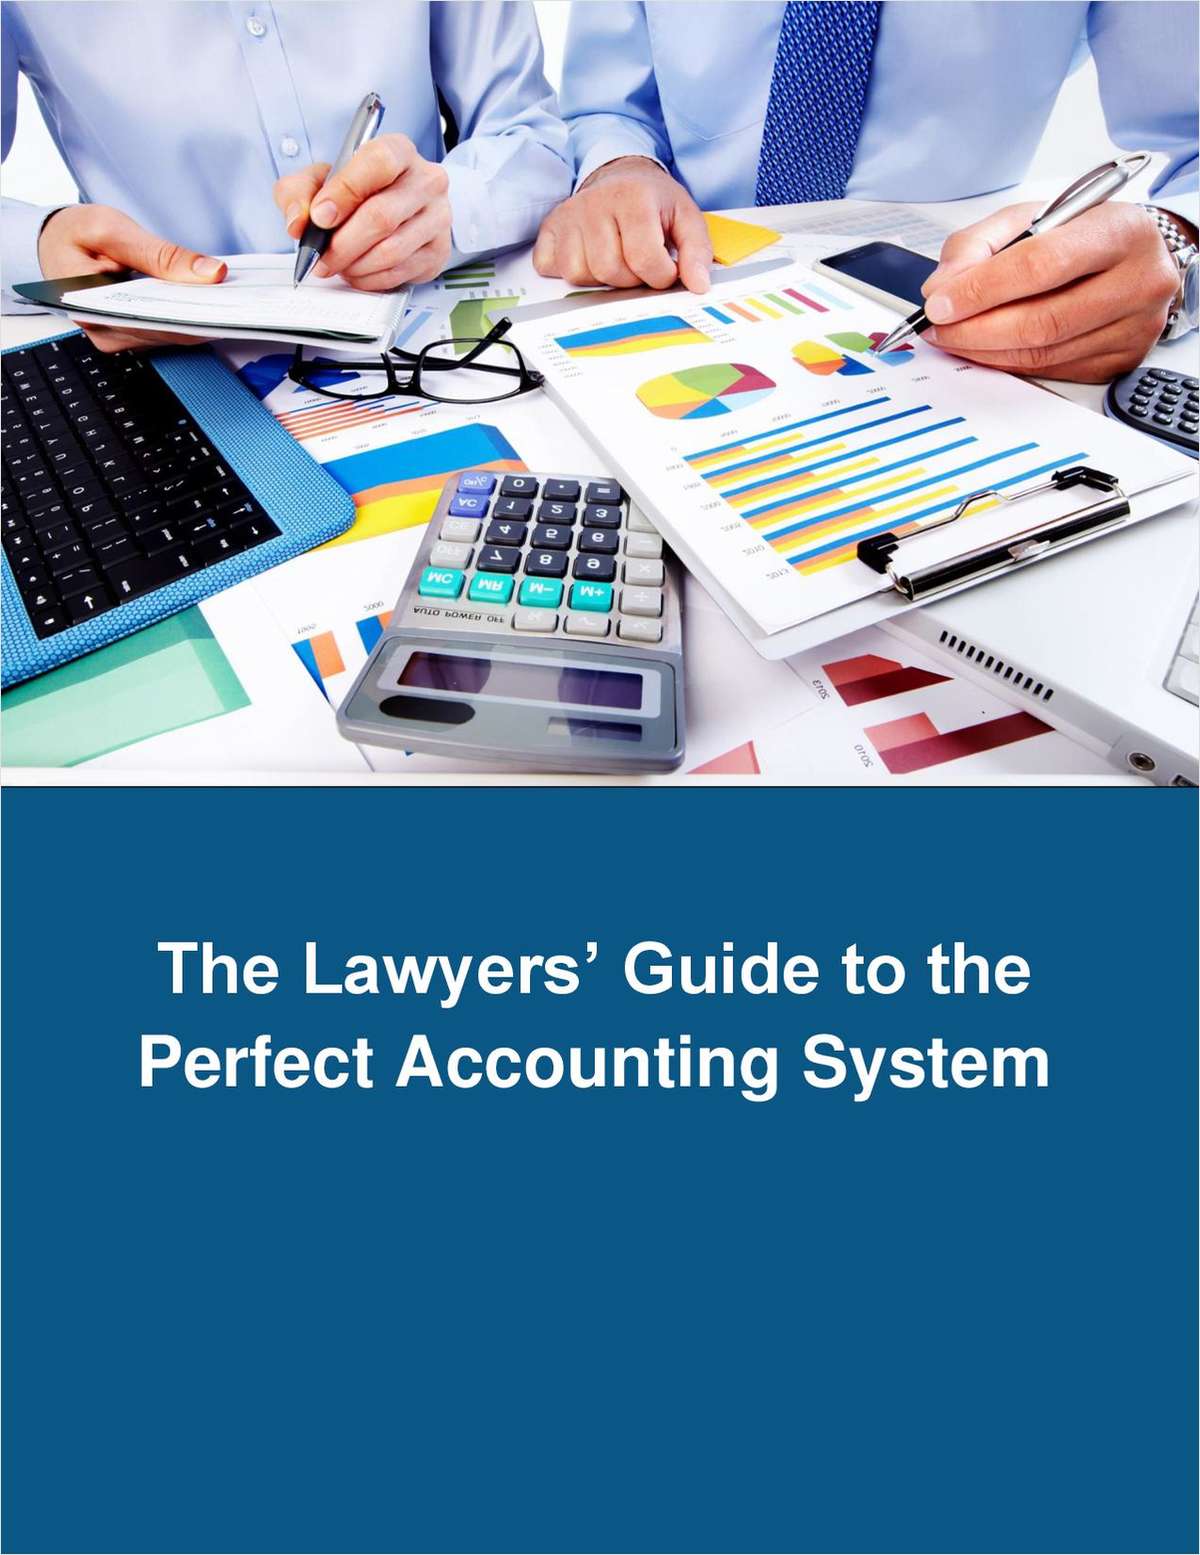 Effective law firm accounting informs better decisions for future spending and billing targets. When done right, your accounting system should provide peace of mind and be a driving force for where your firm is going. Download this guide and learn how to glean valuable insights from an accounting system that works.